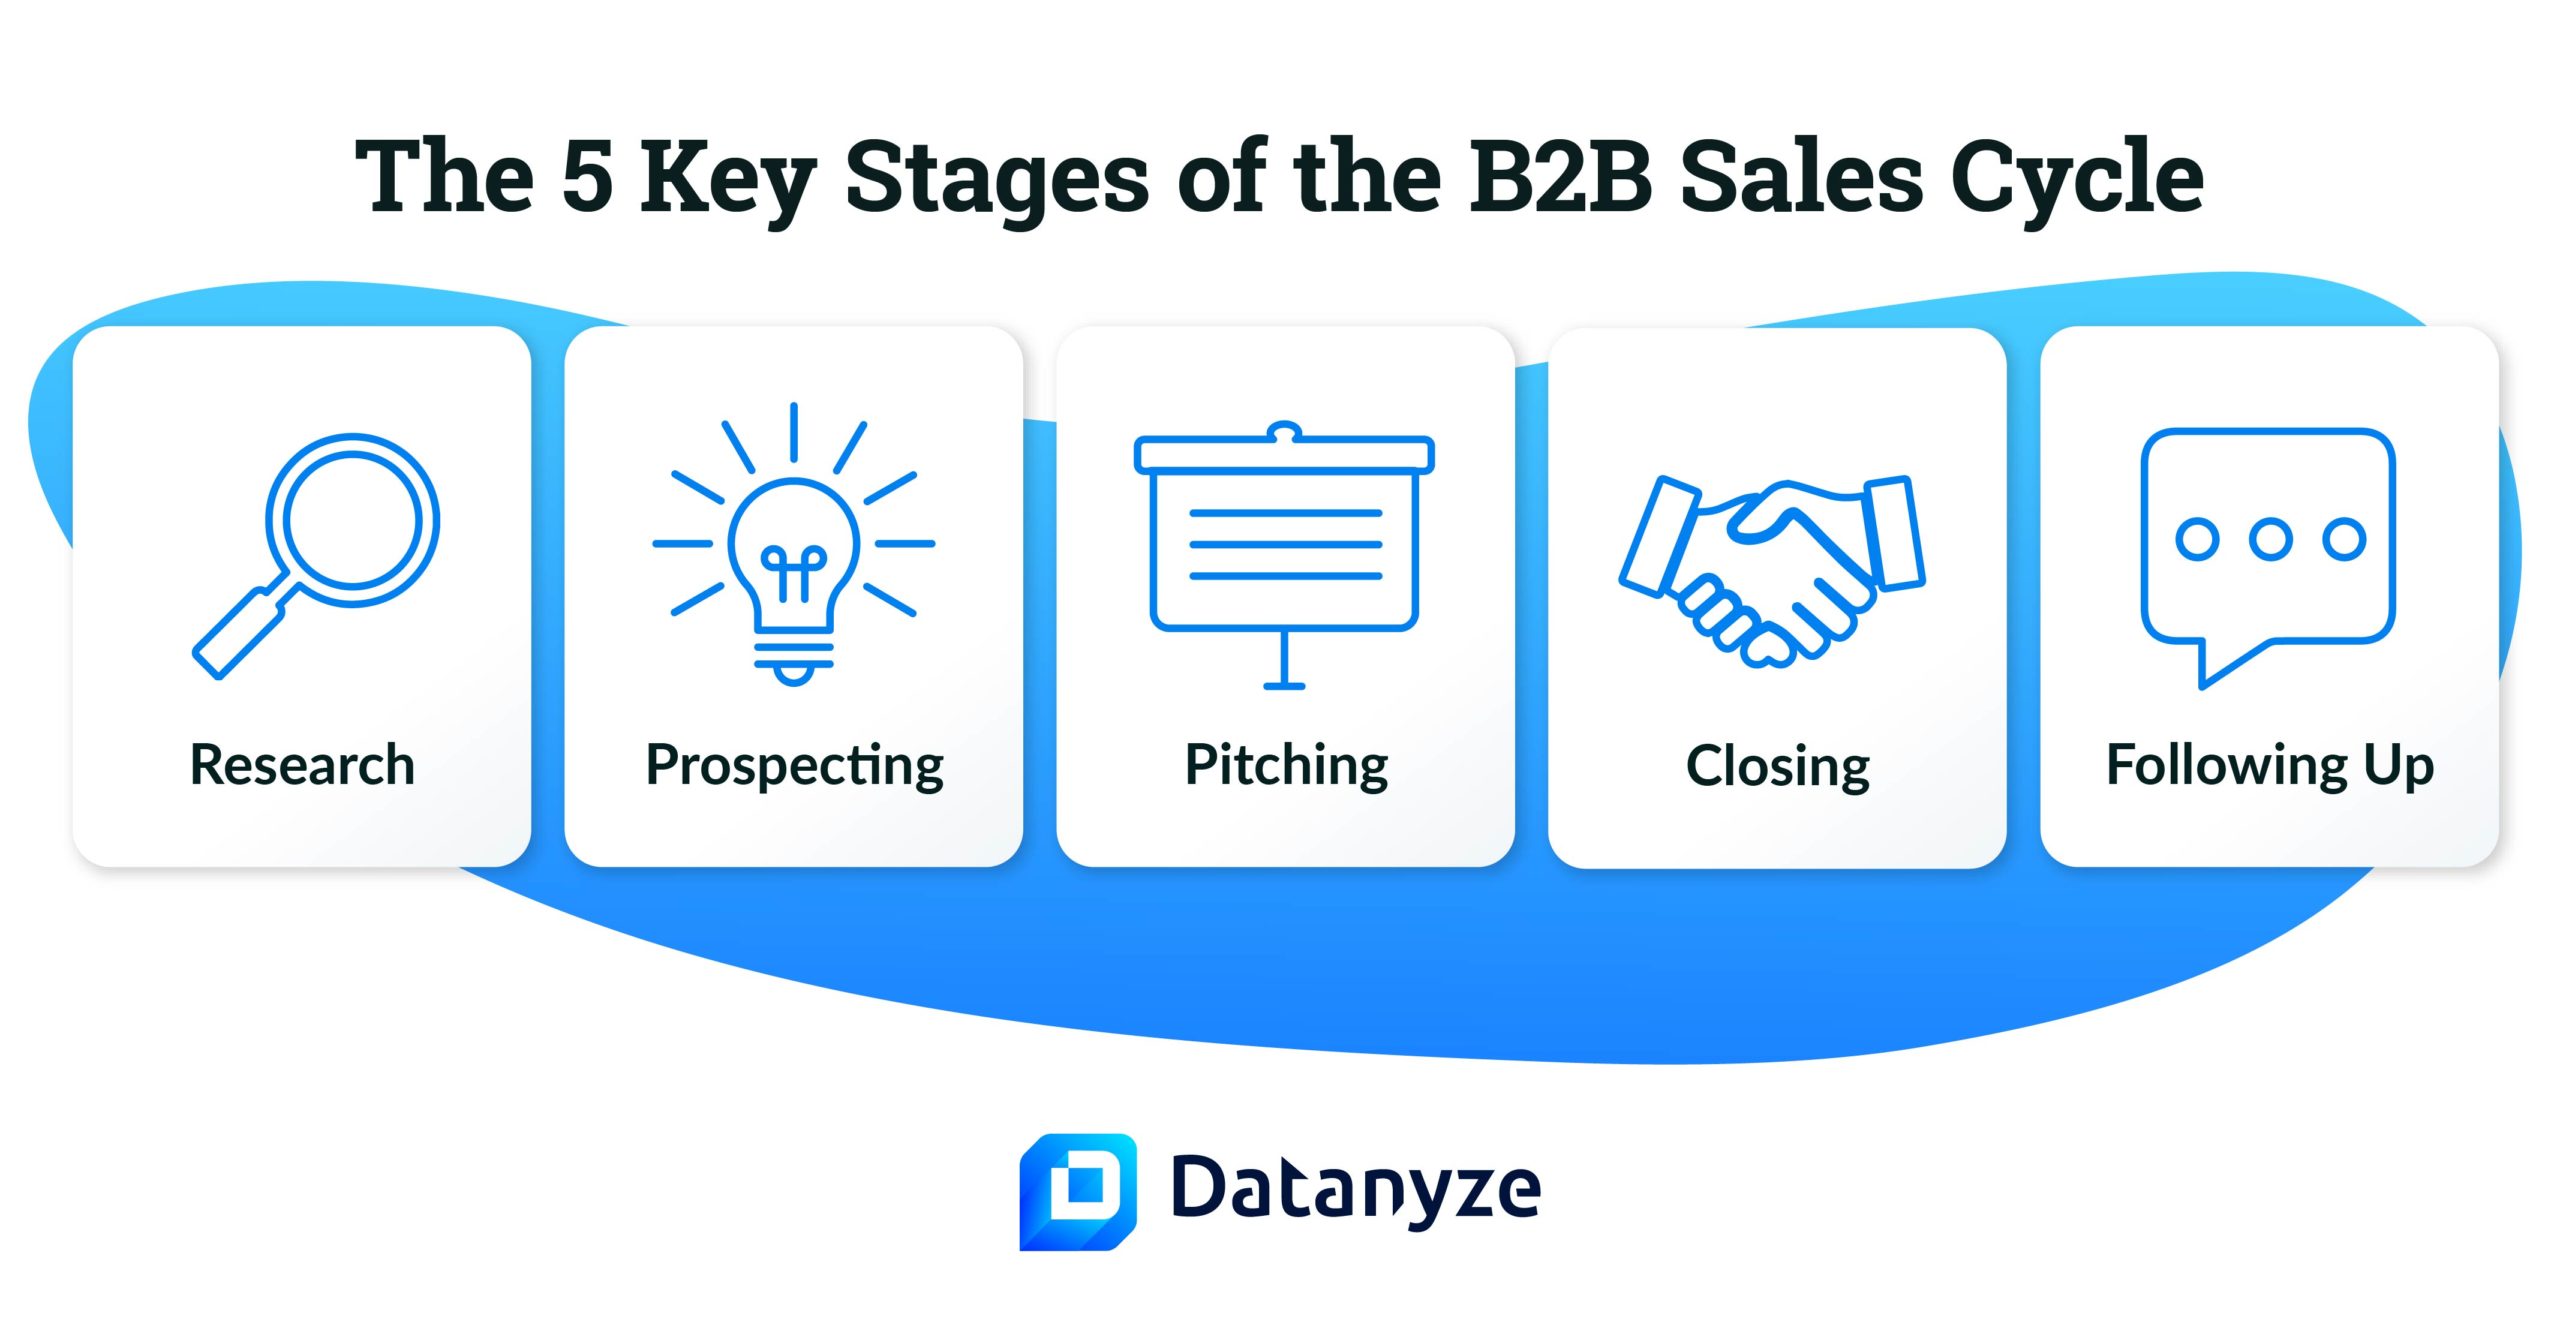 What Are the Key Stages of the B2B Sales Cycle?